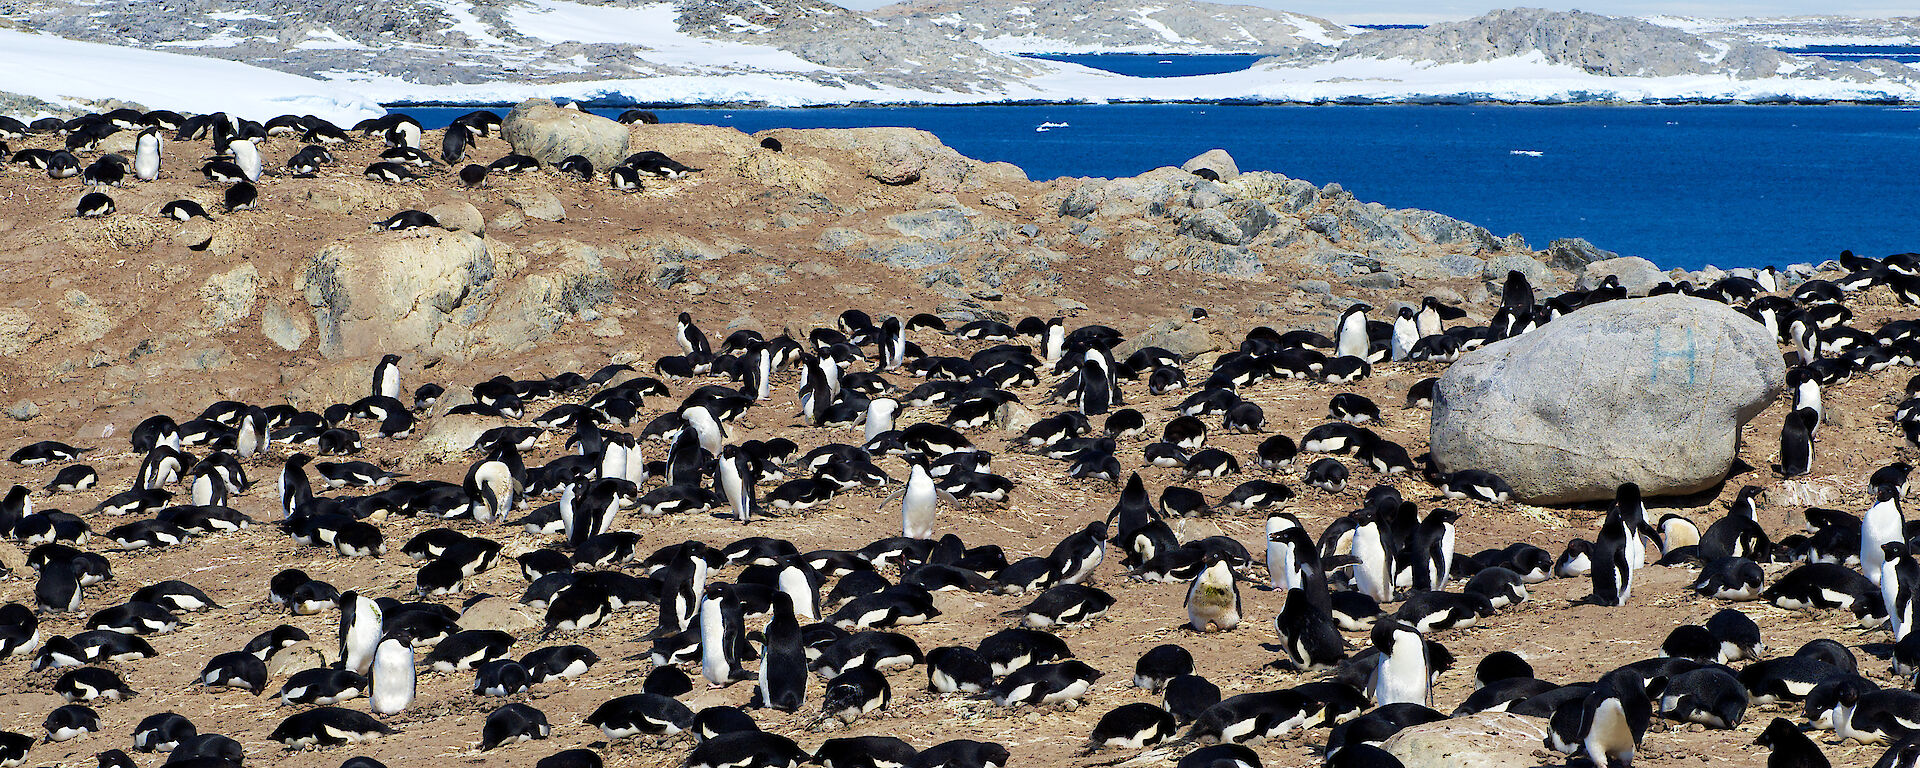 Many penguins on rocky shore with ice in distance